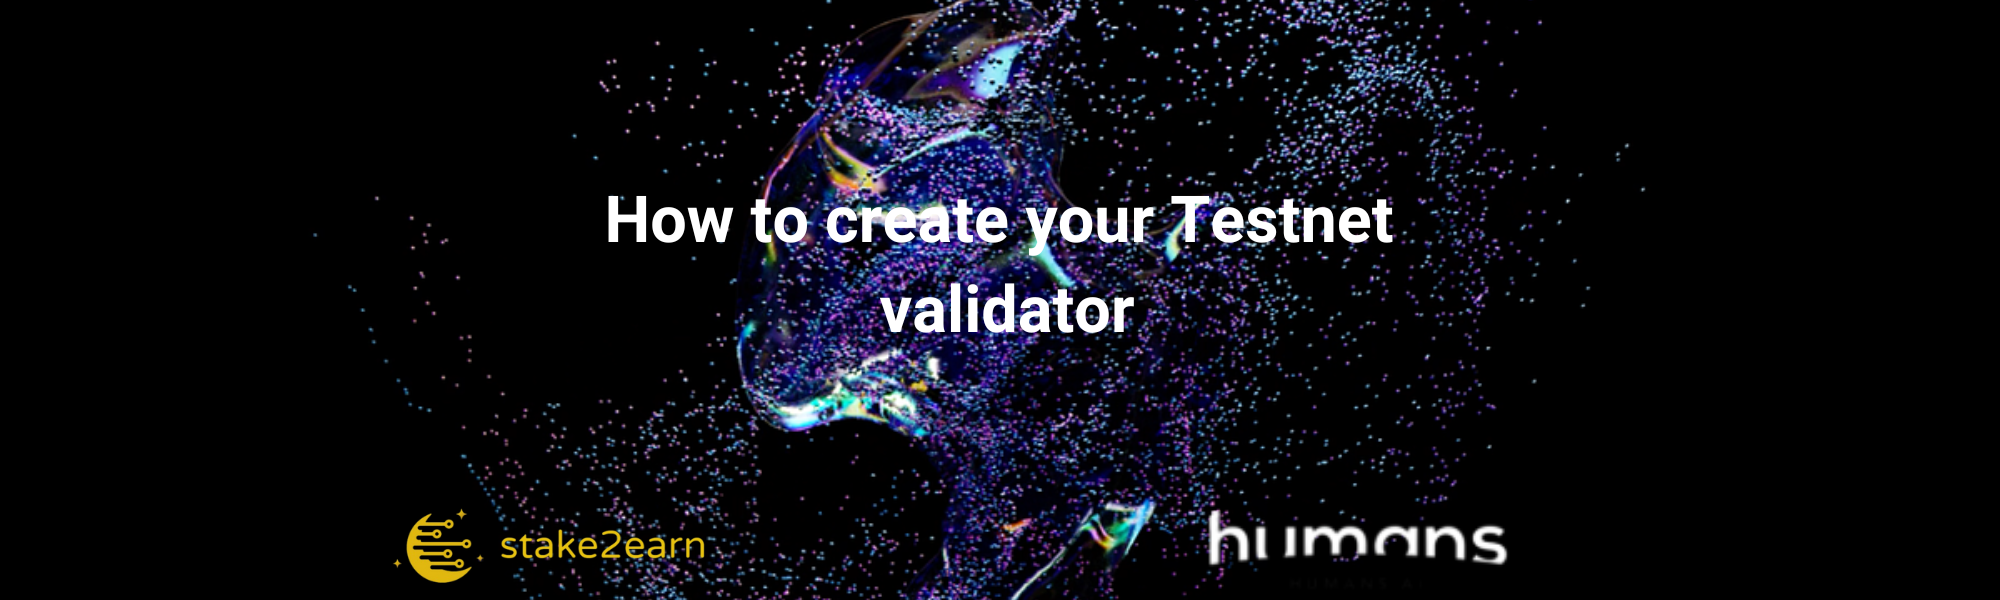 how-to-create-your-testnet-validator.png